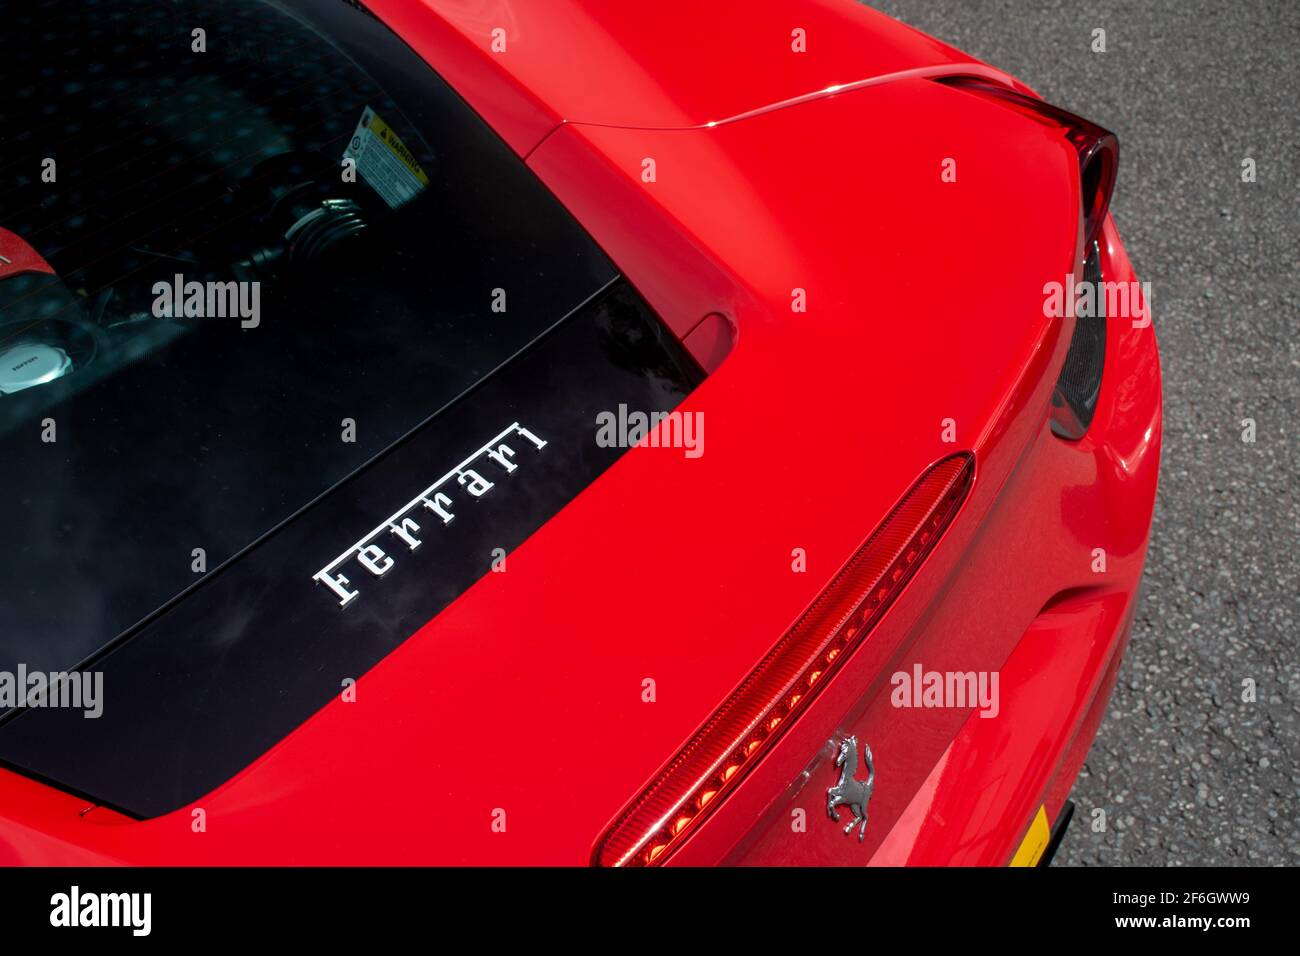 The Ferrari Logo On The Engine Cover On The Rear Of A Red 2017 Ferrari 488 GTB Stock Photo